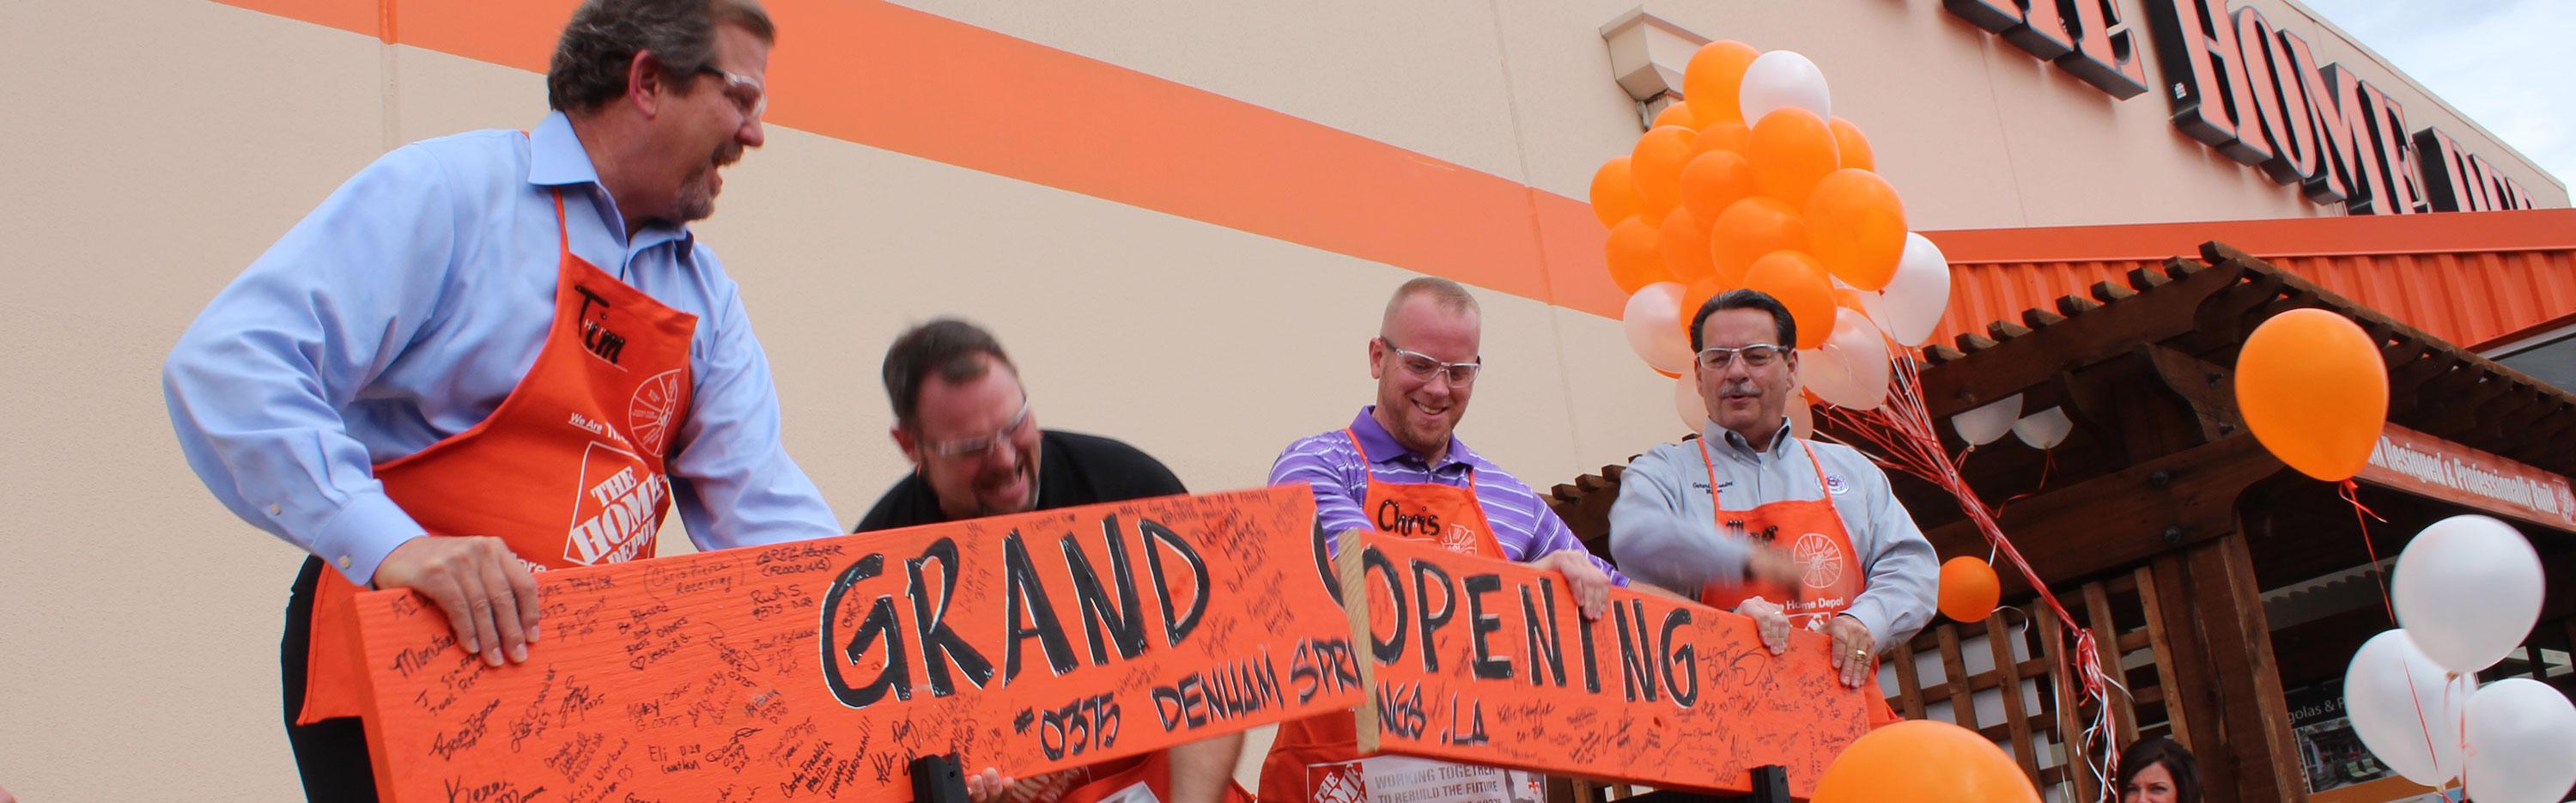 Home Depot associates at board-cutting ceremony